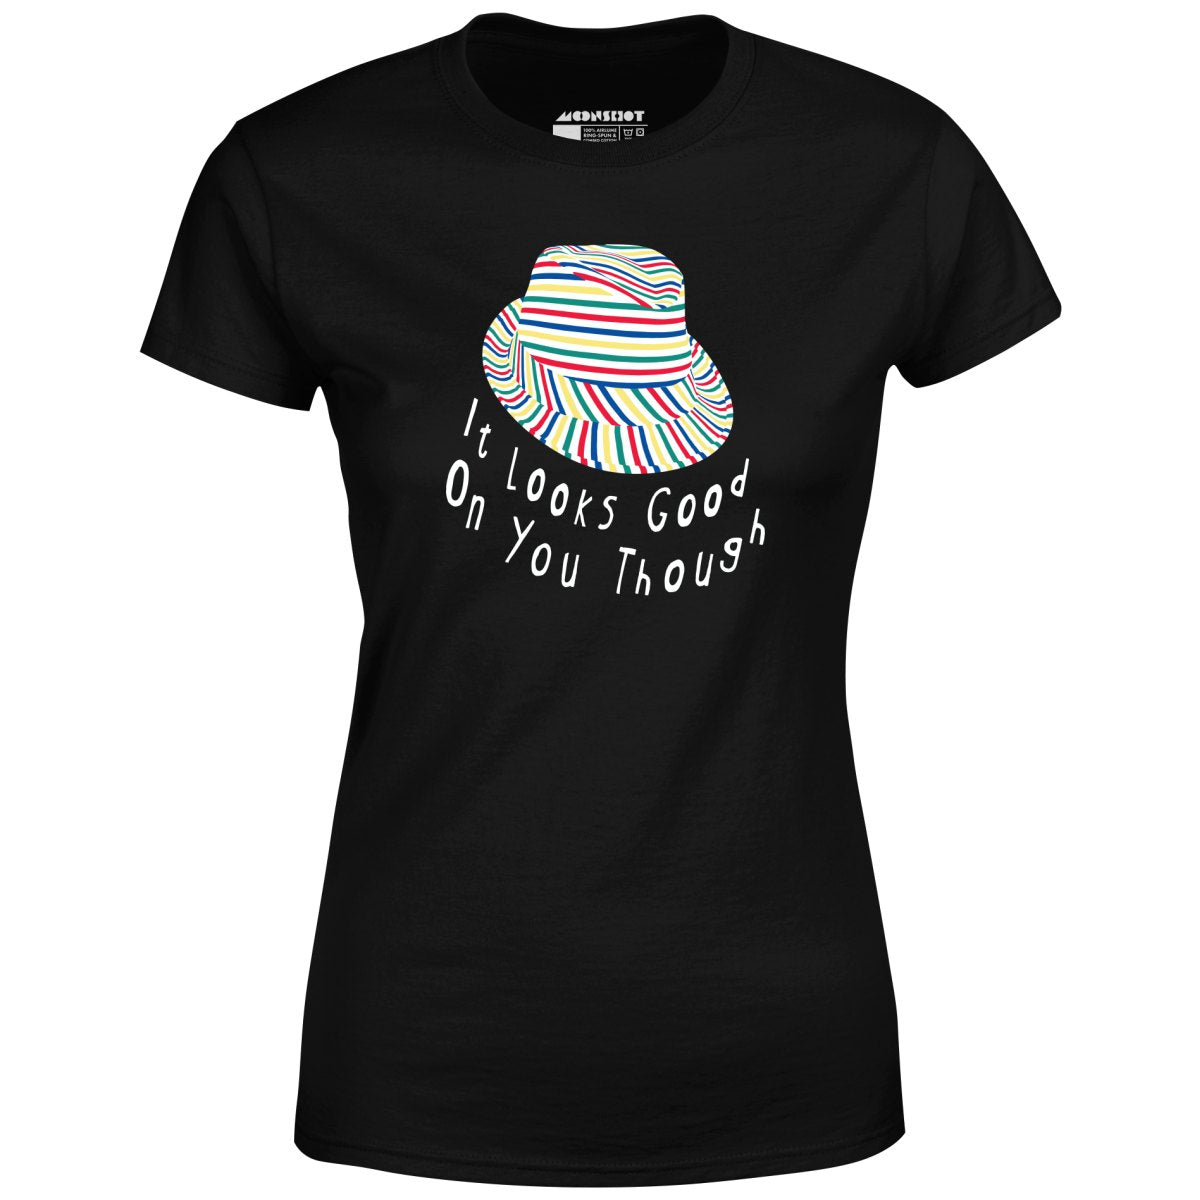 It Looks Good on You Though - Women's T-Shirt